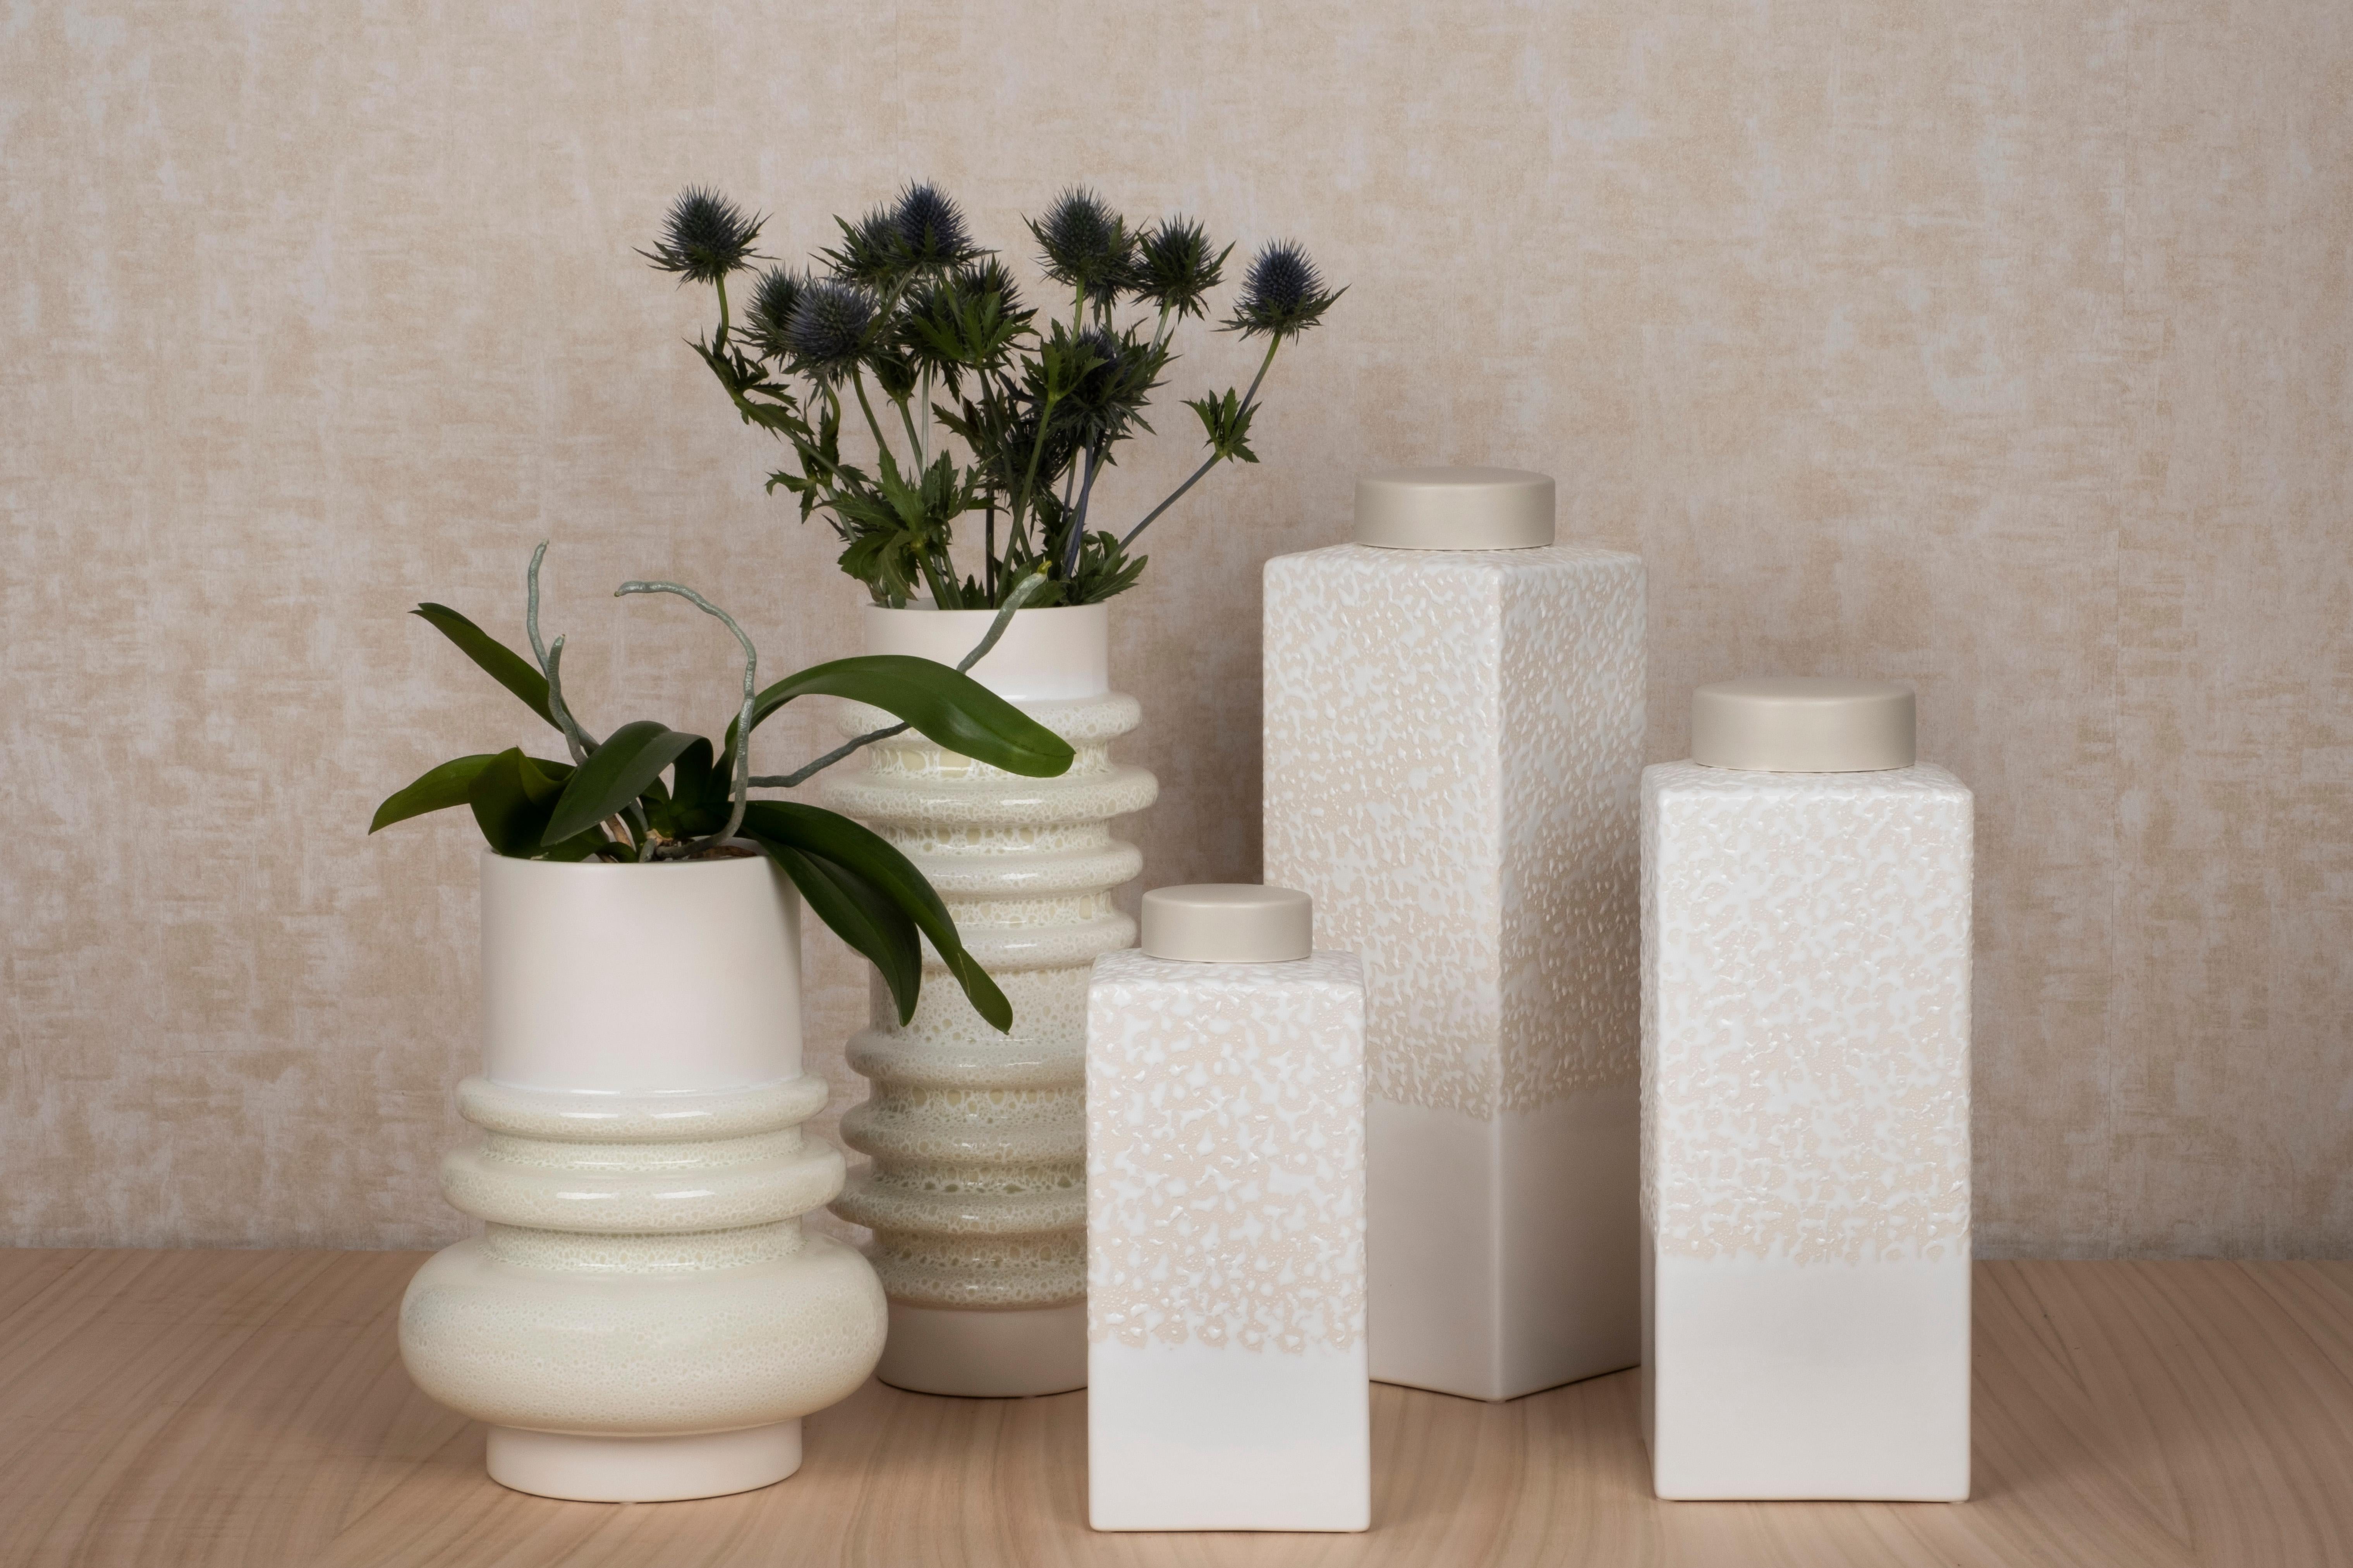 Hailey & Henry Pots, Lusitanus Home Collection, Handcrafted in Portugal - Europe by Lusitanus Home.

This beautiful set includes two waterproof ceramic vases and three pots, perfect to be displayed together in endless combinations, with or without